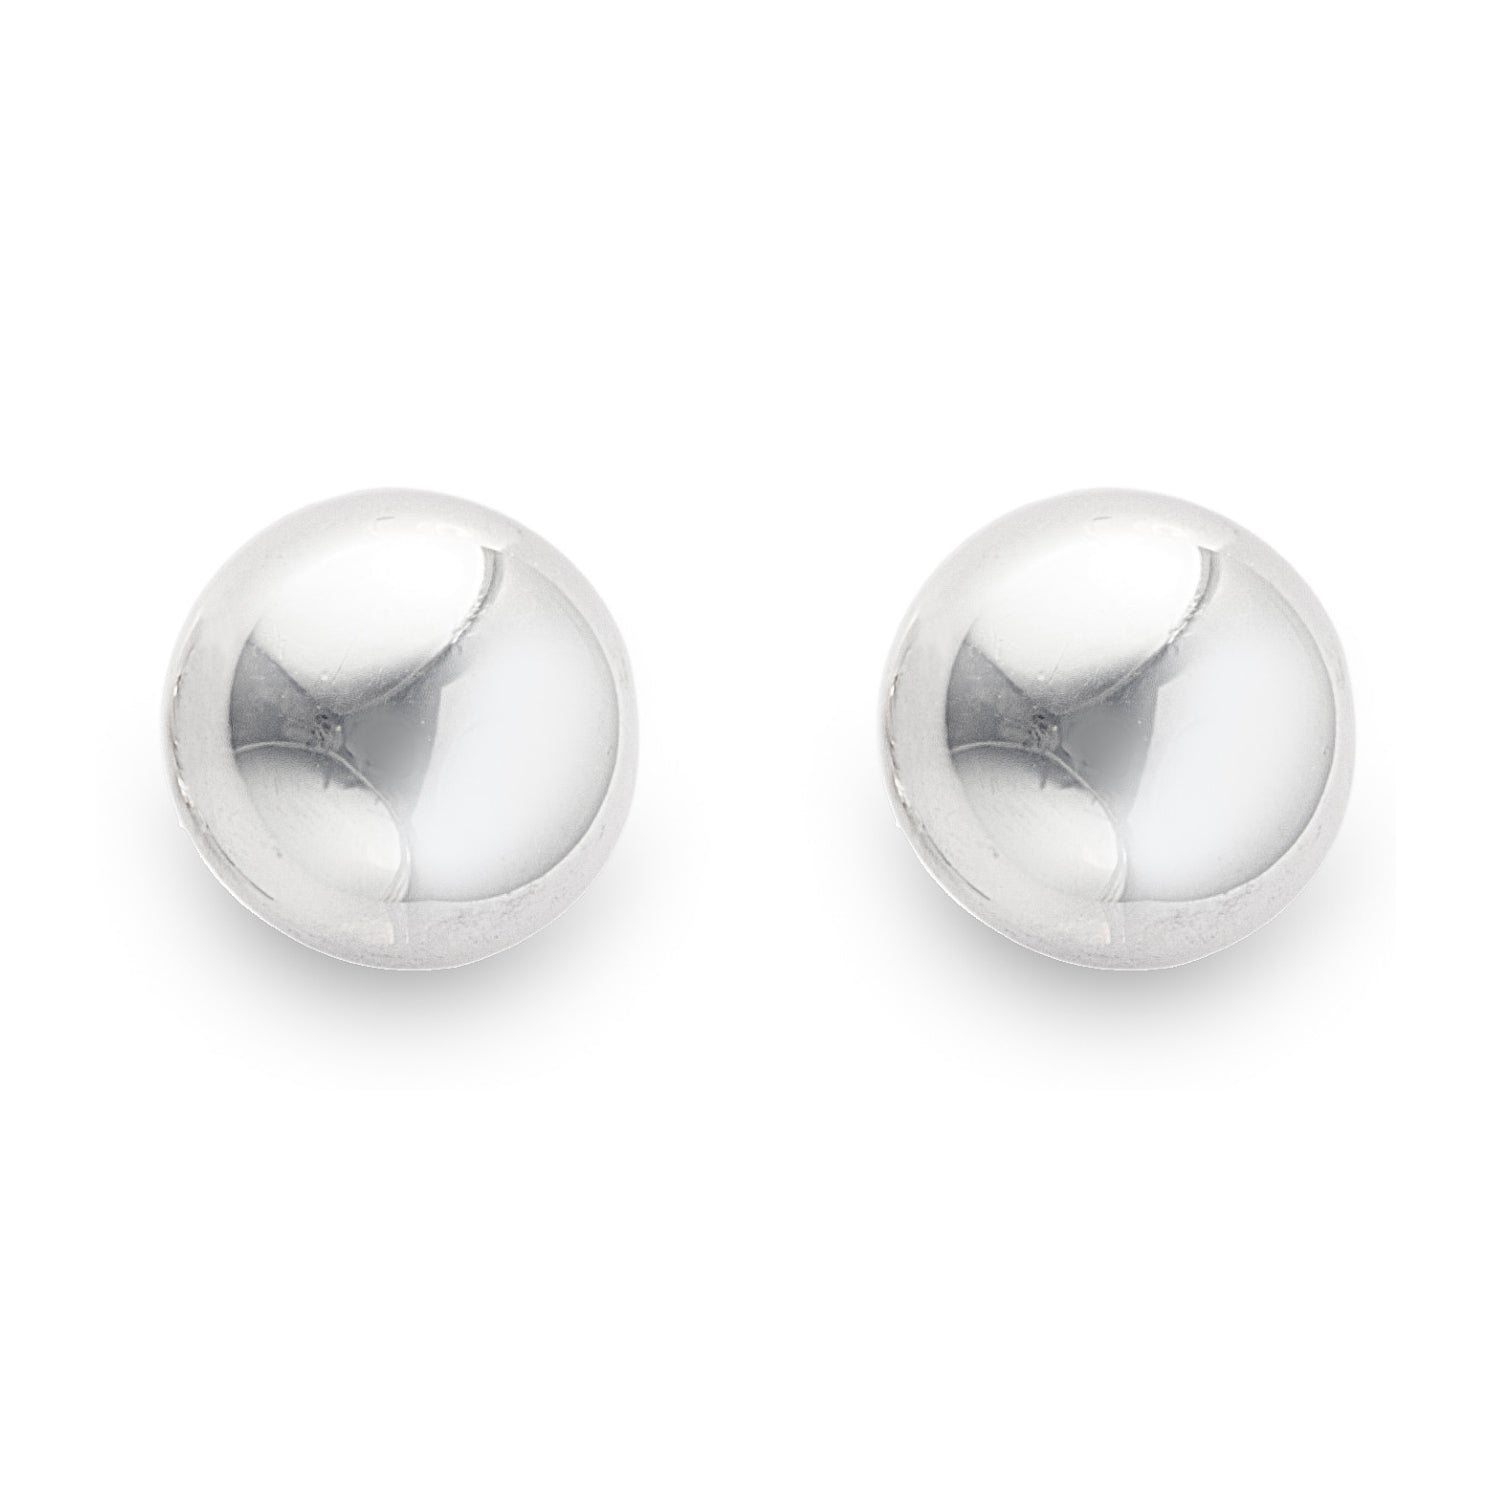 The Villa Ball Stud Earrings feature balls in 925 sterling silver. Approx. 8mm ball diameter. Result: Comfortable everyday jewellery. 